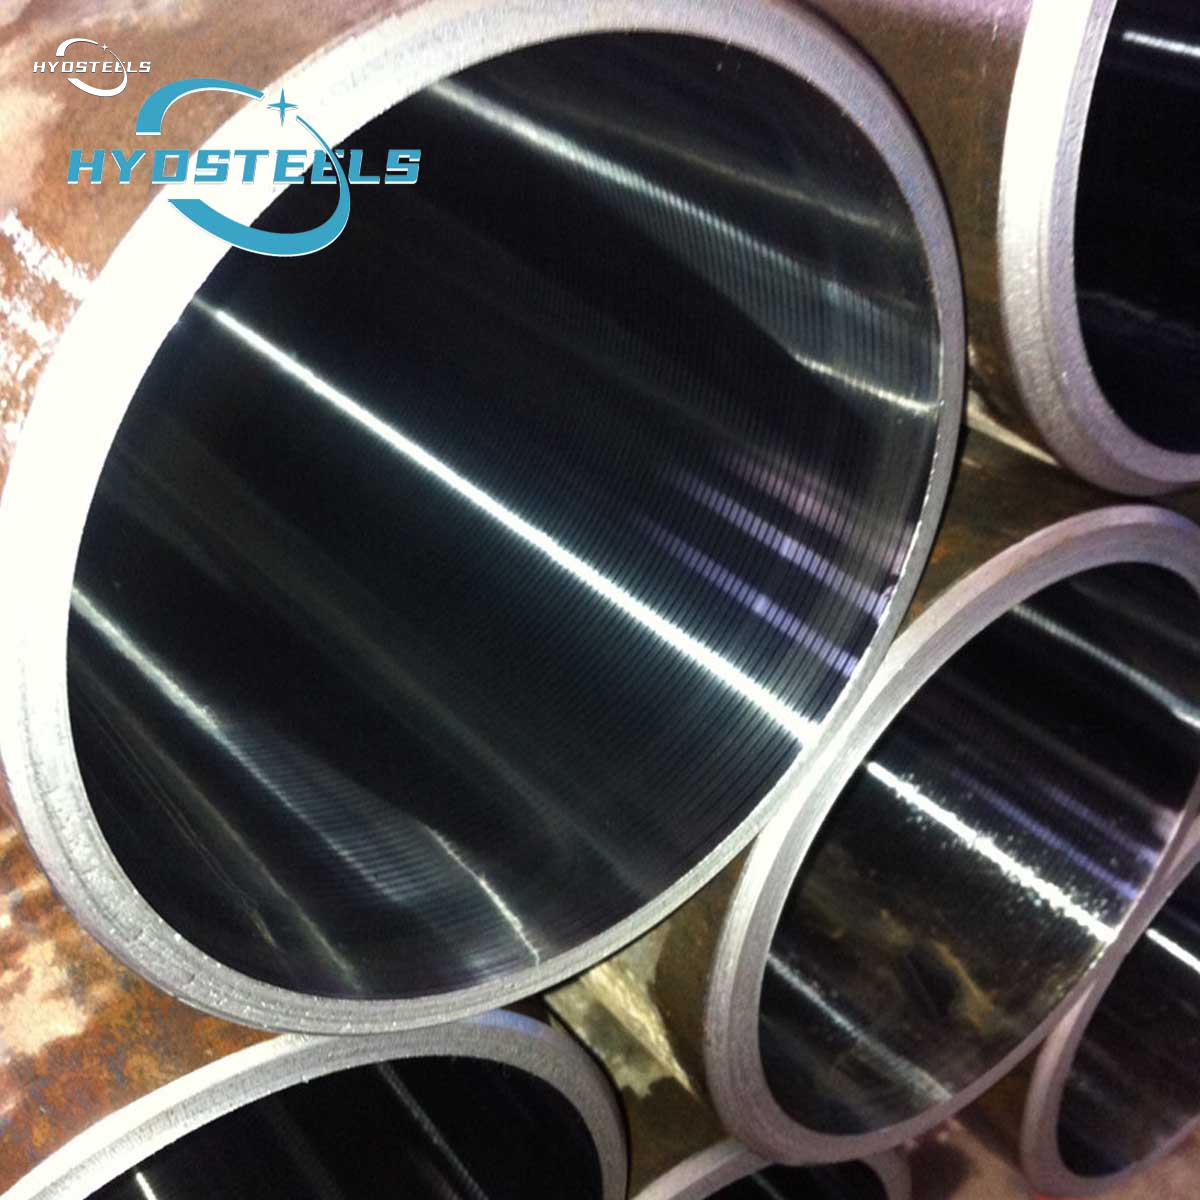 China Hydraulic Tubing Ready To Honed Tube Seamless Steel Honed Tube Suppliers